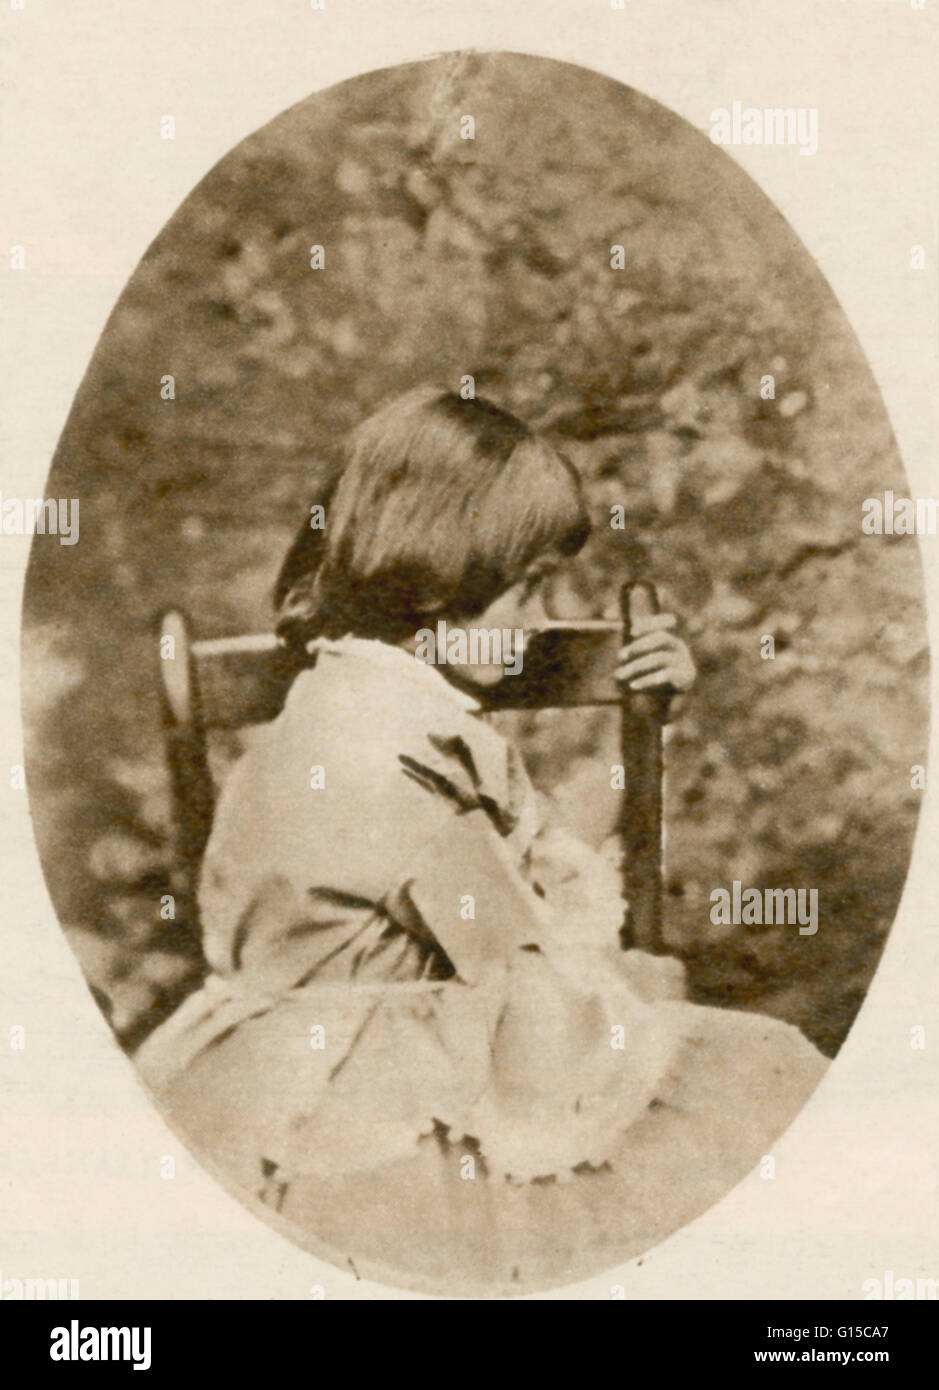 Alice Pleasance Liddell (May 4, 1852 - November 16, 1934), known for most of her adult life by her married name, Alice Hargreaves, inspired the children's classic Alice's Adventures in Wonderland by Lewis Carroll, whose protagonist Alice is said to be nam Stock Photo